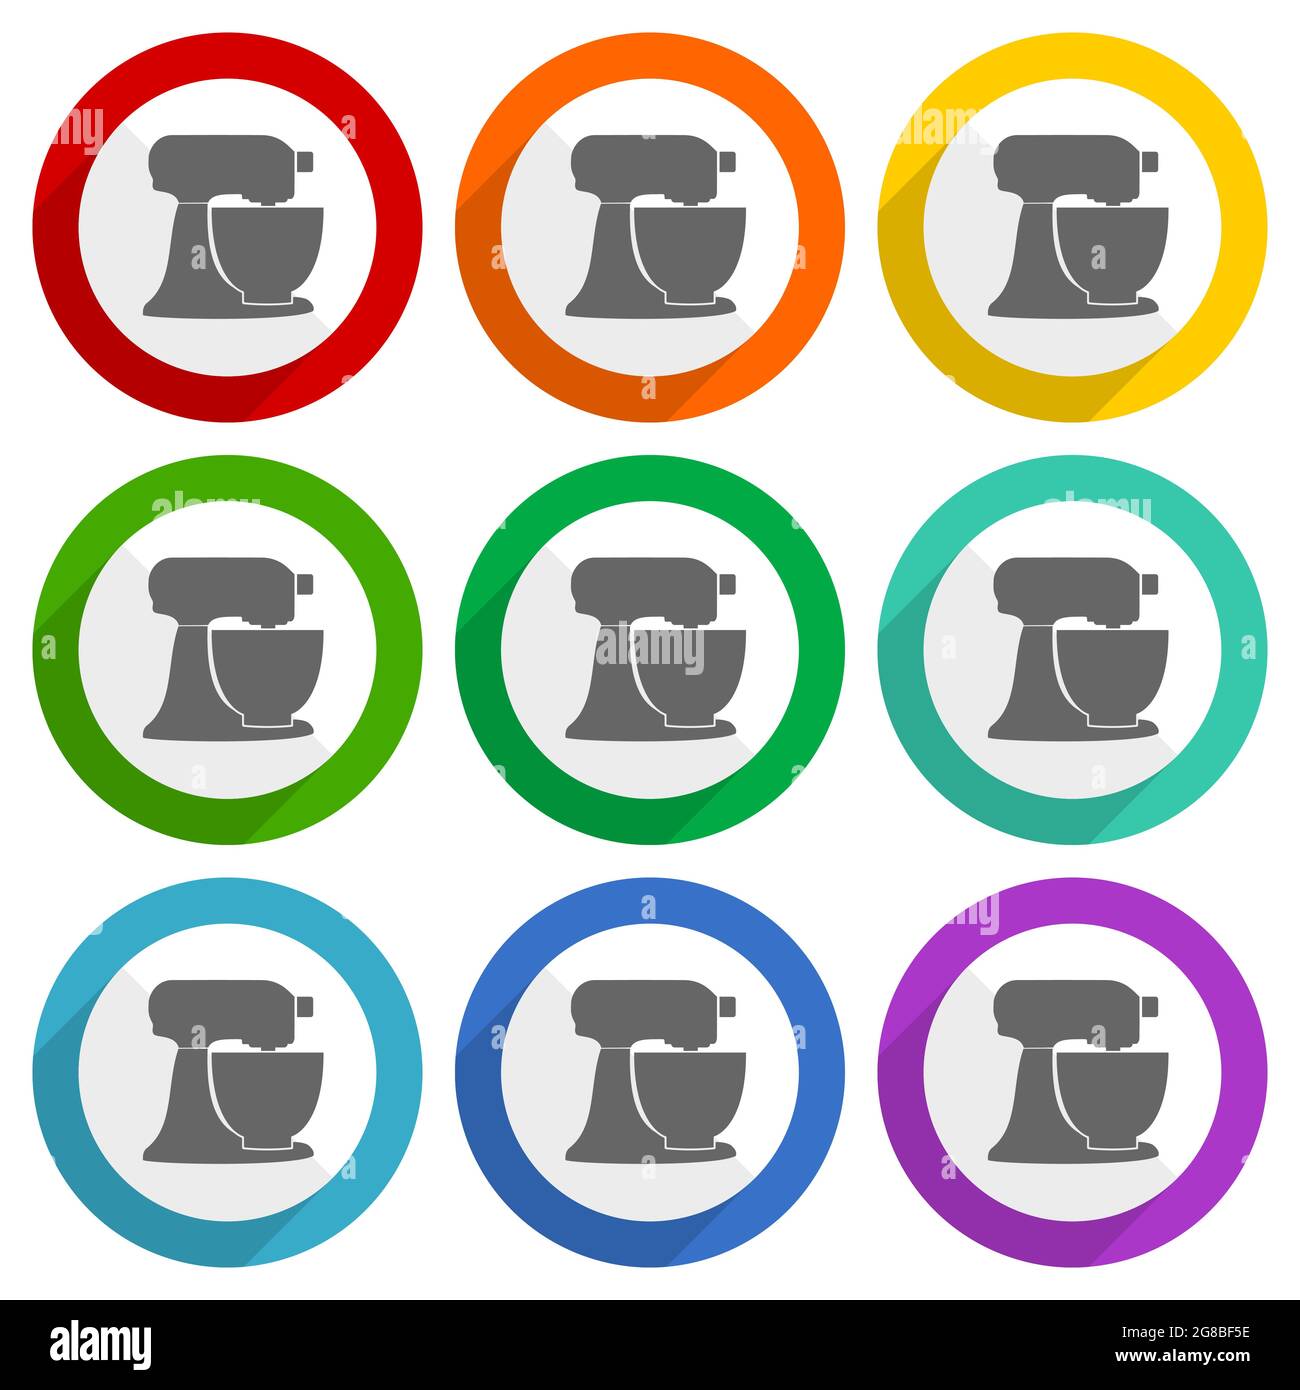 https://c8.alamy.com/comp/2G8BF5E/planetary-mixer-kitchen-equipment-vector-icons-set-of-colorful-flat-design-buttons-for-webdesign-and-mobile-applications-2G8BF5E.jpg